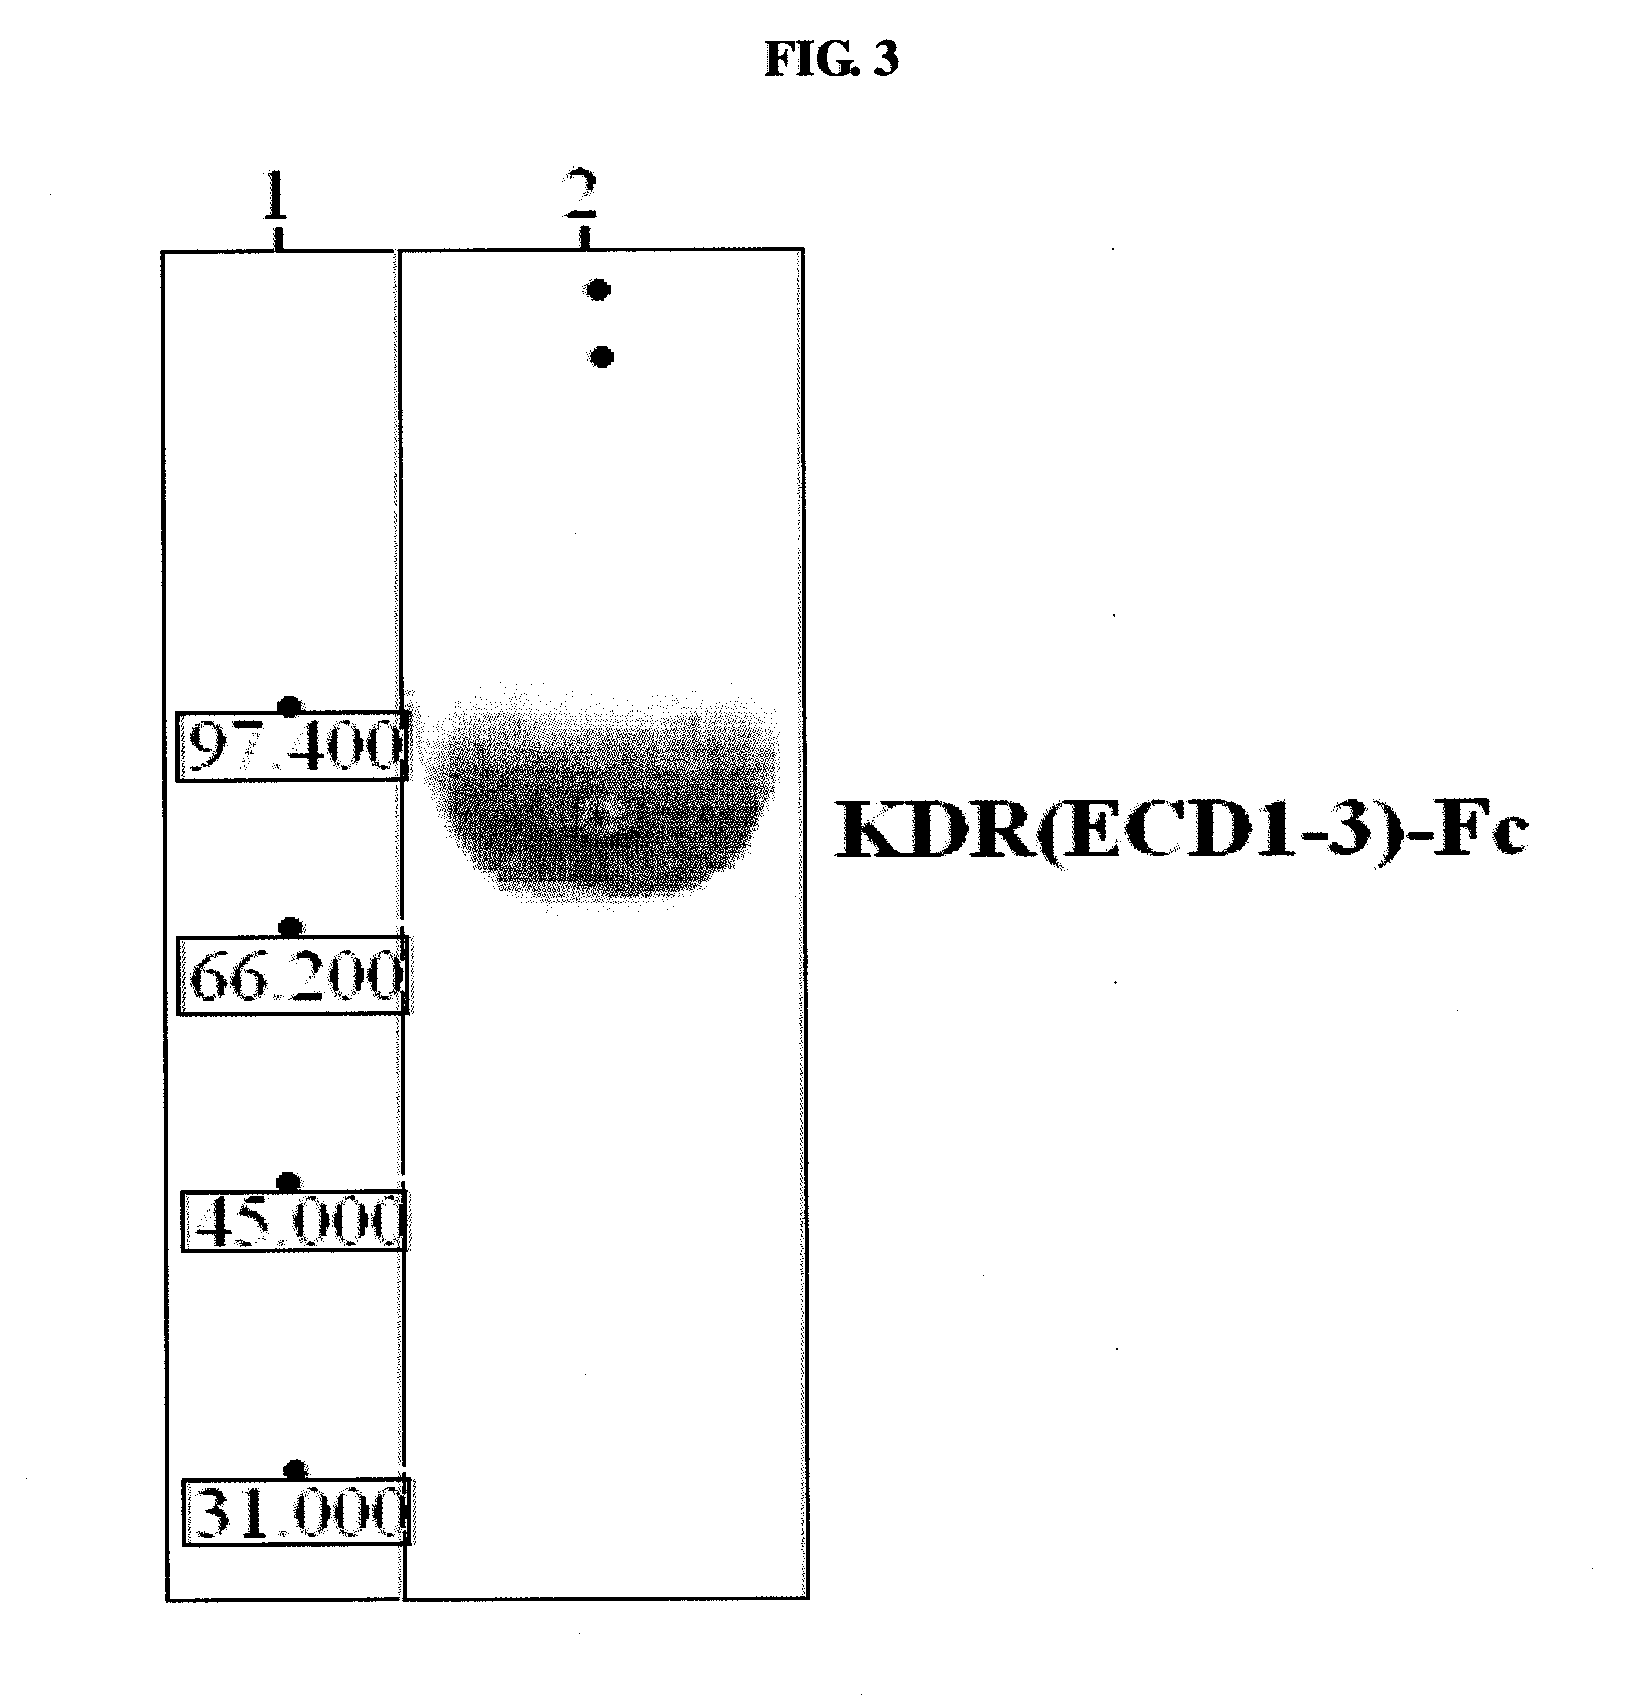 Human monoclonal antibody neutralizing vascular endothelial growth factor receptor and use thereof